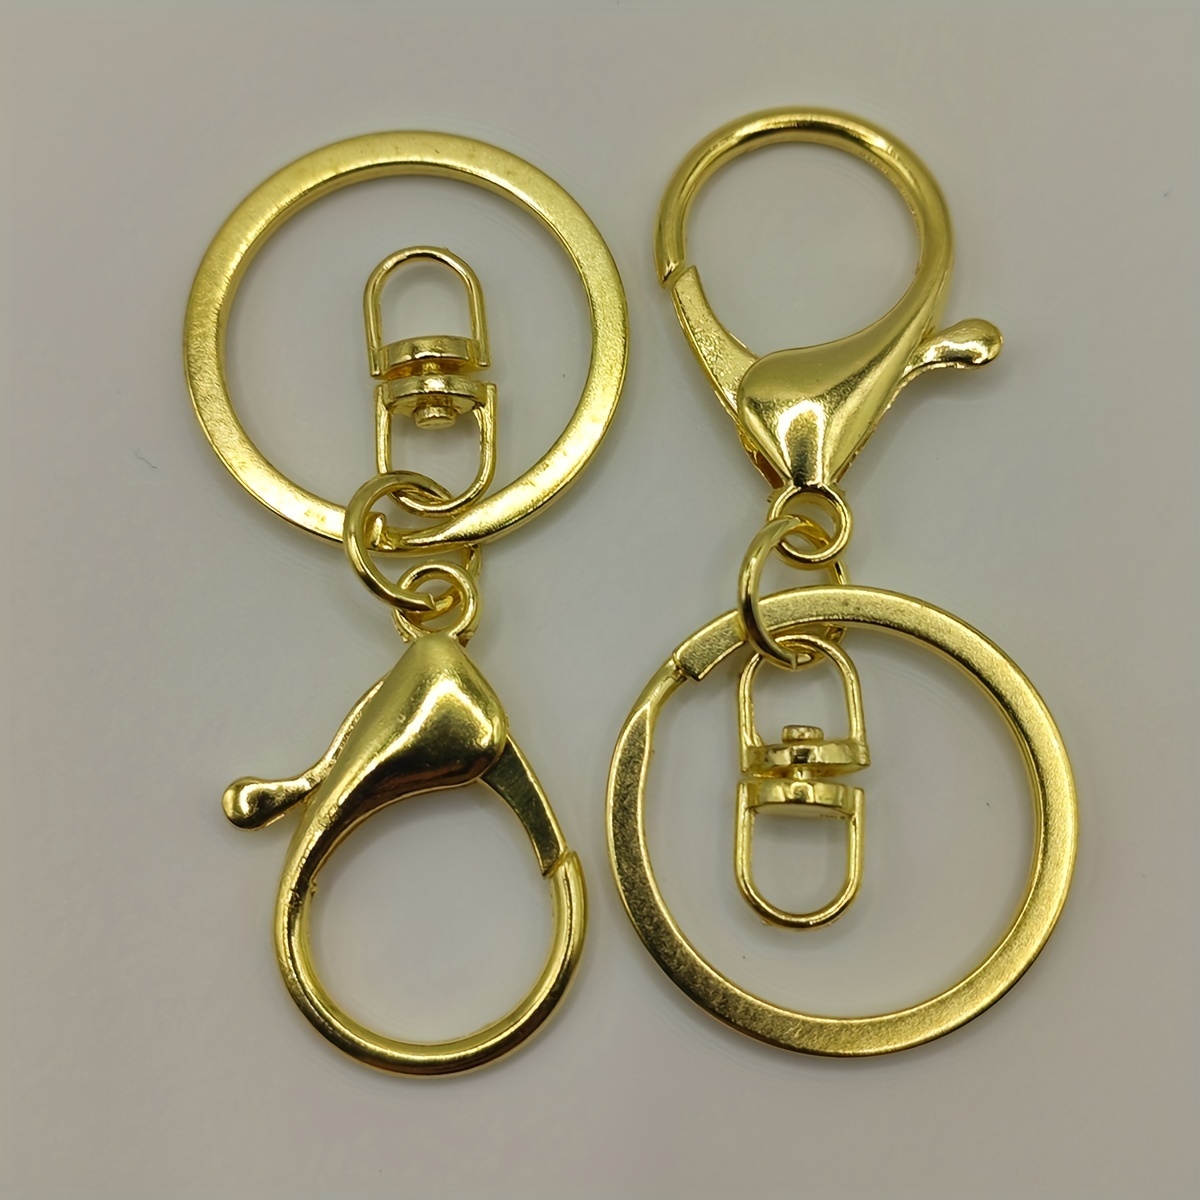 2pcs Keychain Pendant Ring Chain For Men Diy Jewelry Accessories 308 Lobster  Clasp Three Piece Set Manufacturer Support Production Mens Key Ring, Check  Out Today's Deals Now